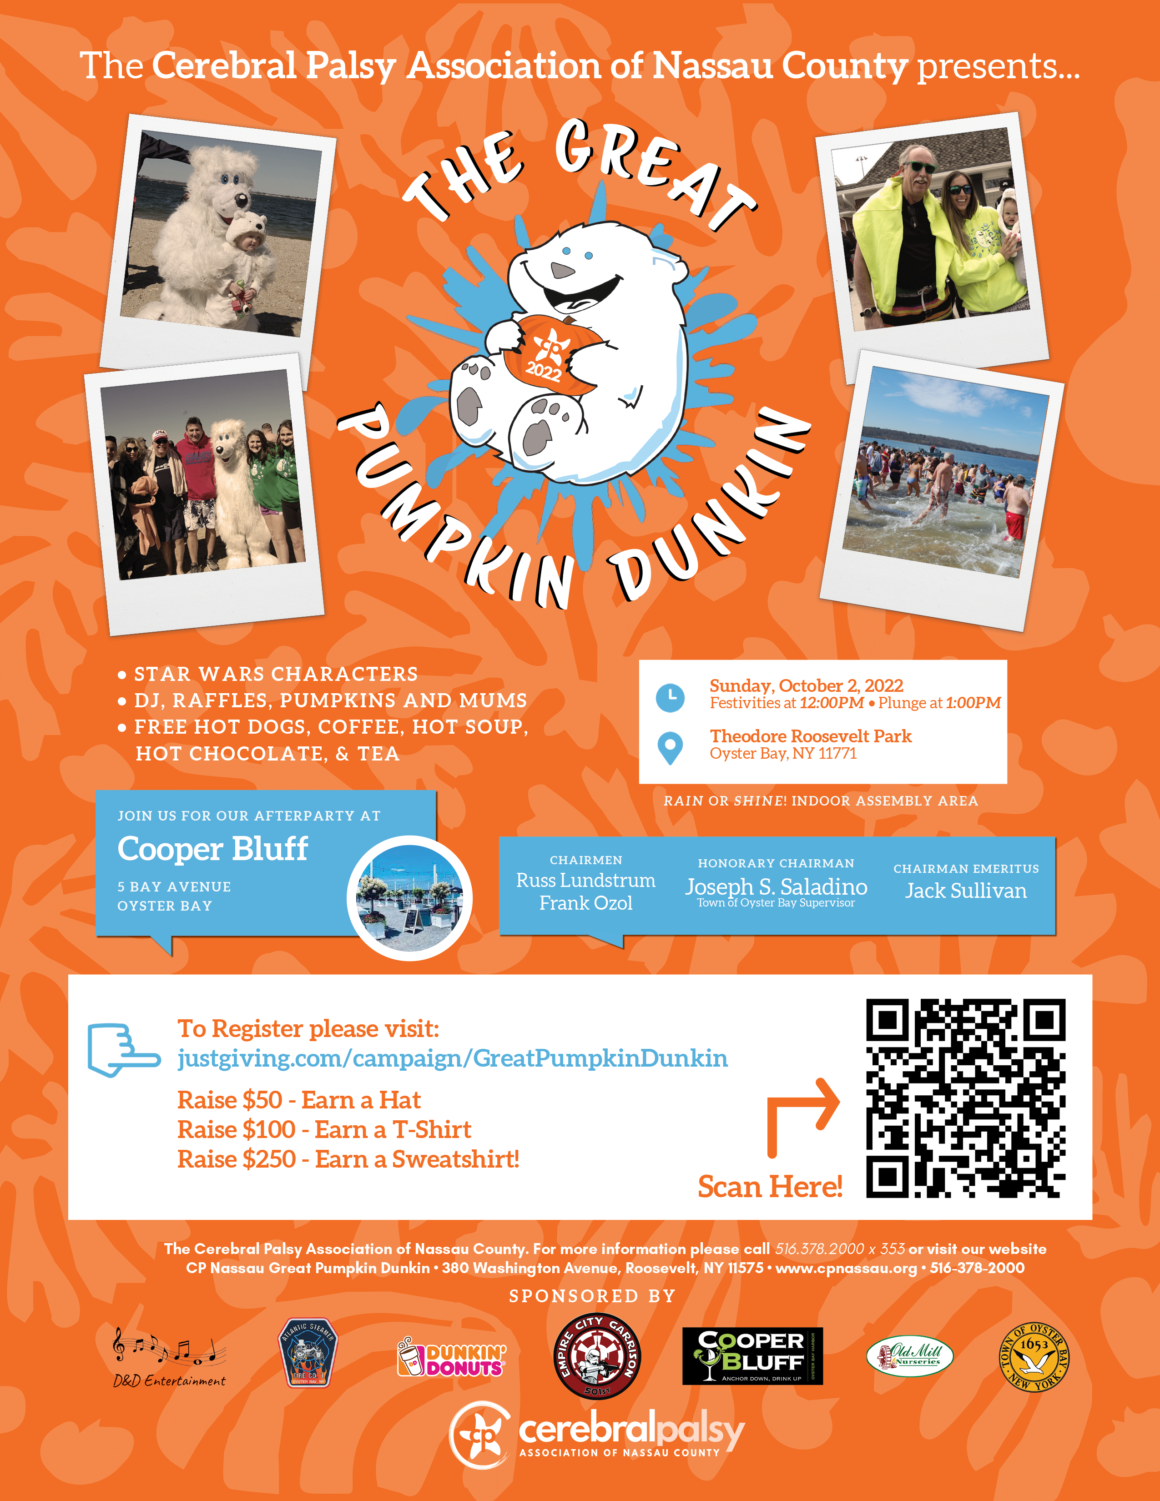 Saladino Invites Residents to Great Pumpkin Dunkin’ in Support of the Cerebral Palsy Association